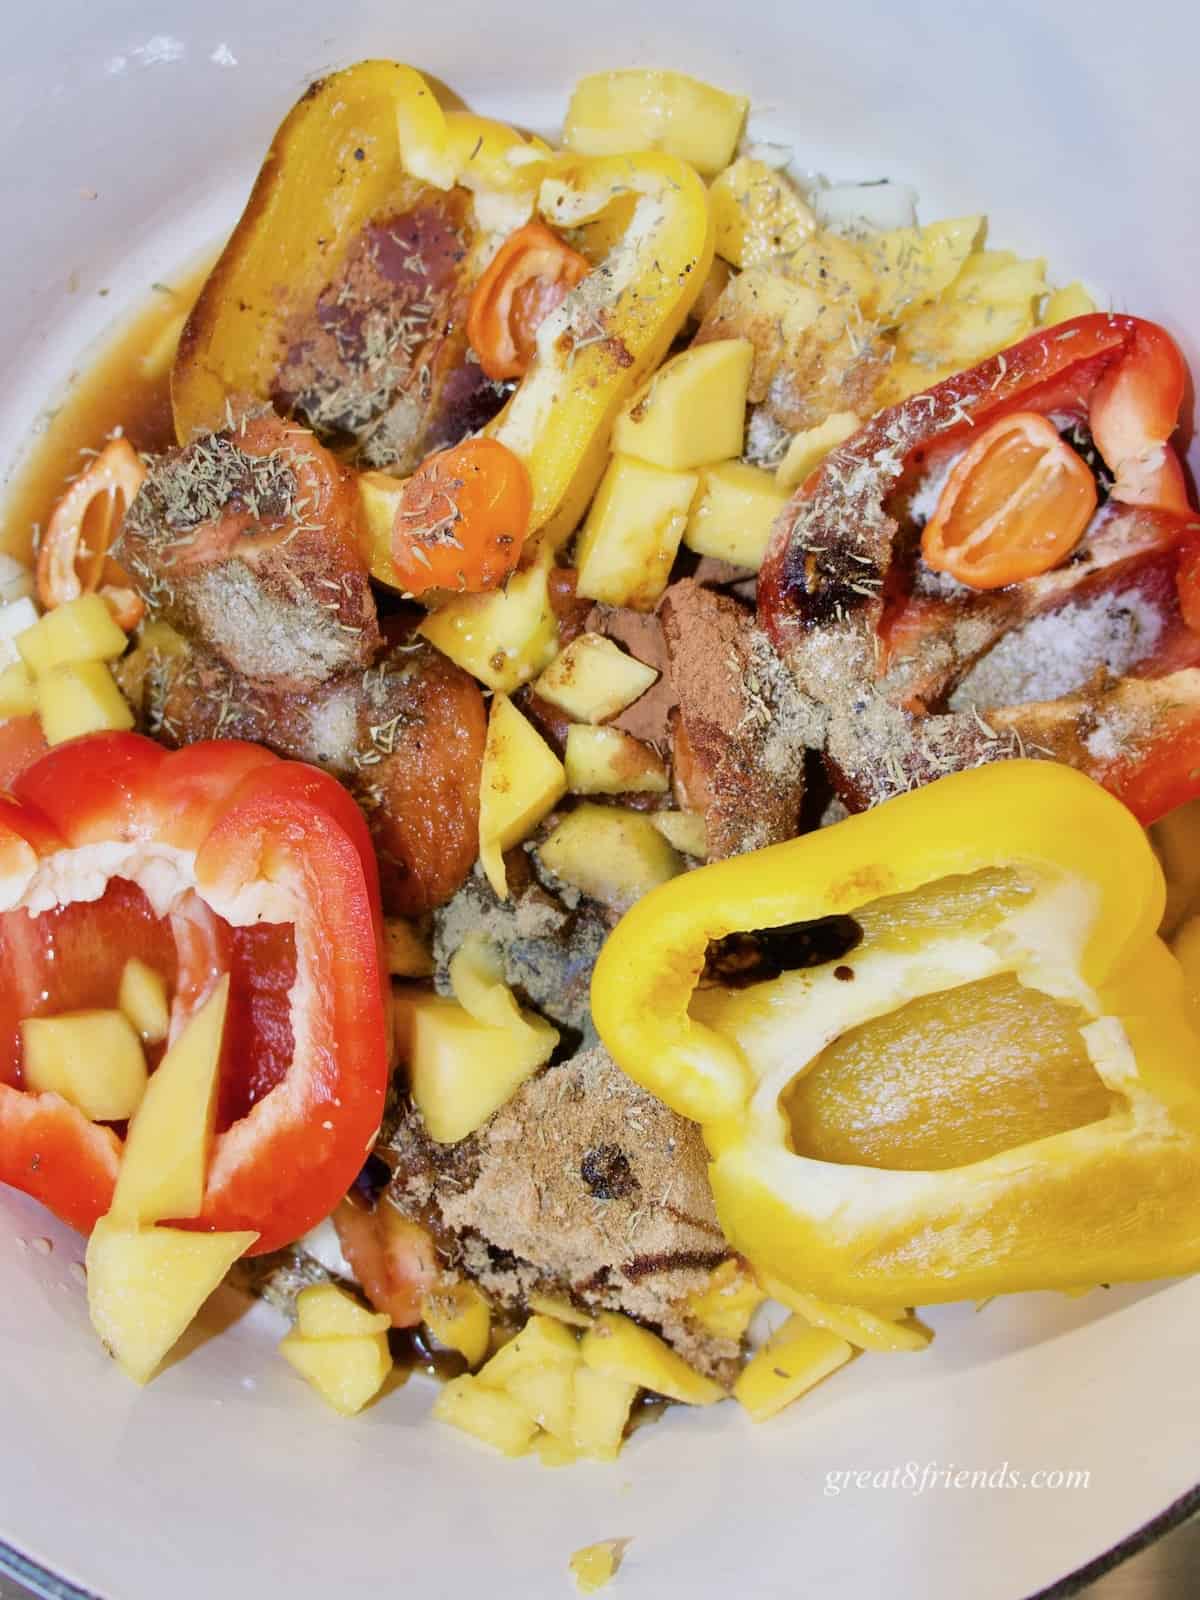 Pot of cut up vegetables and fruits with spices.